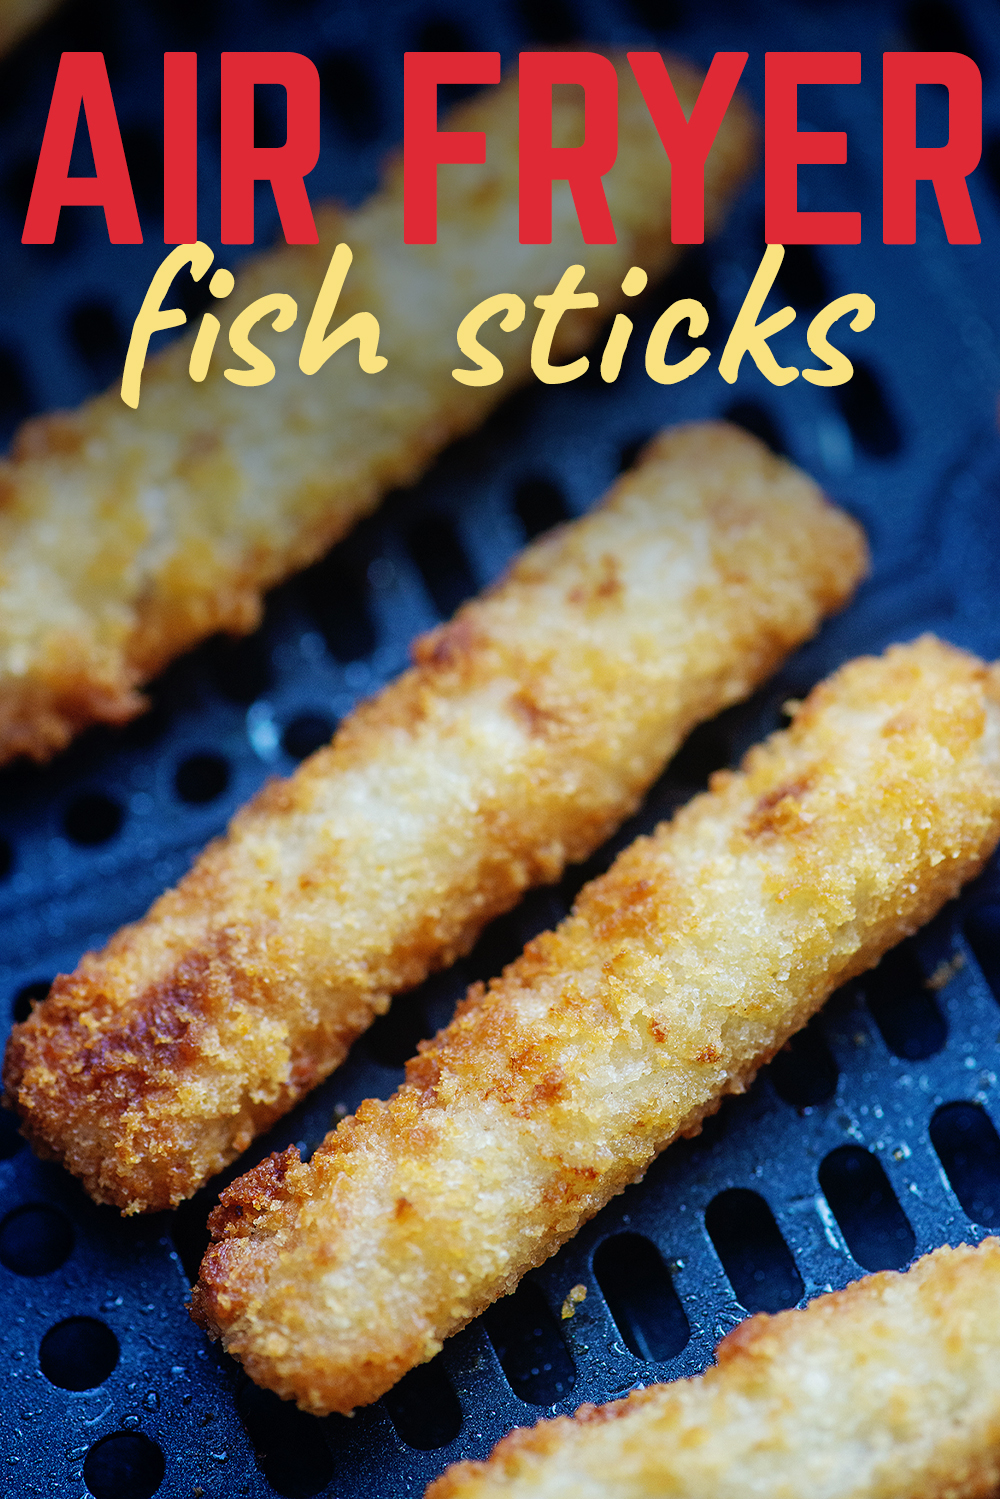 These fish sticks come of out the air fryer crispy, and are very easy to make!